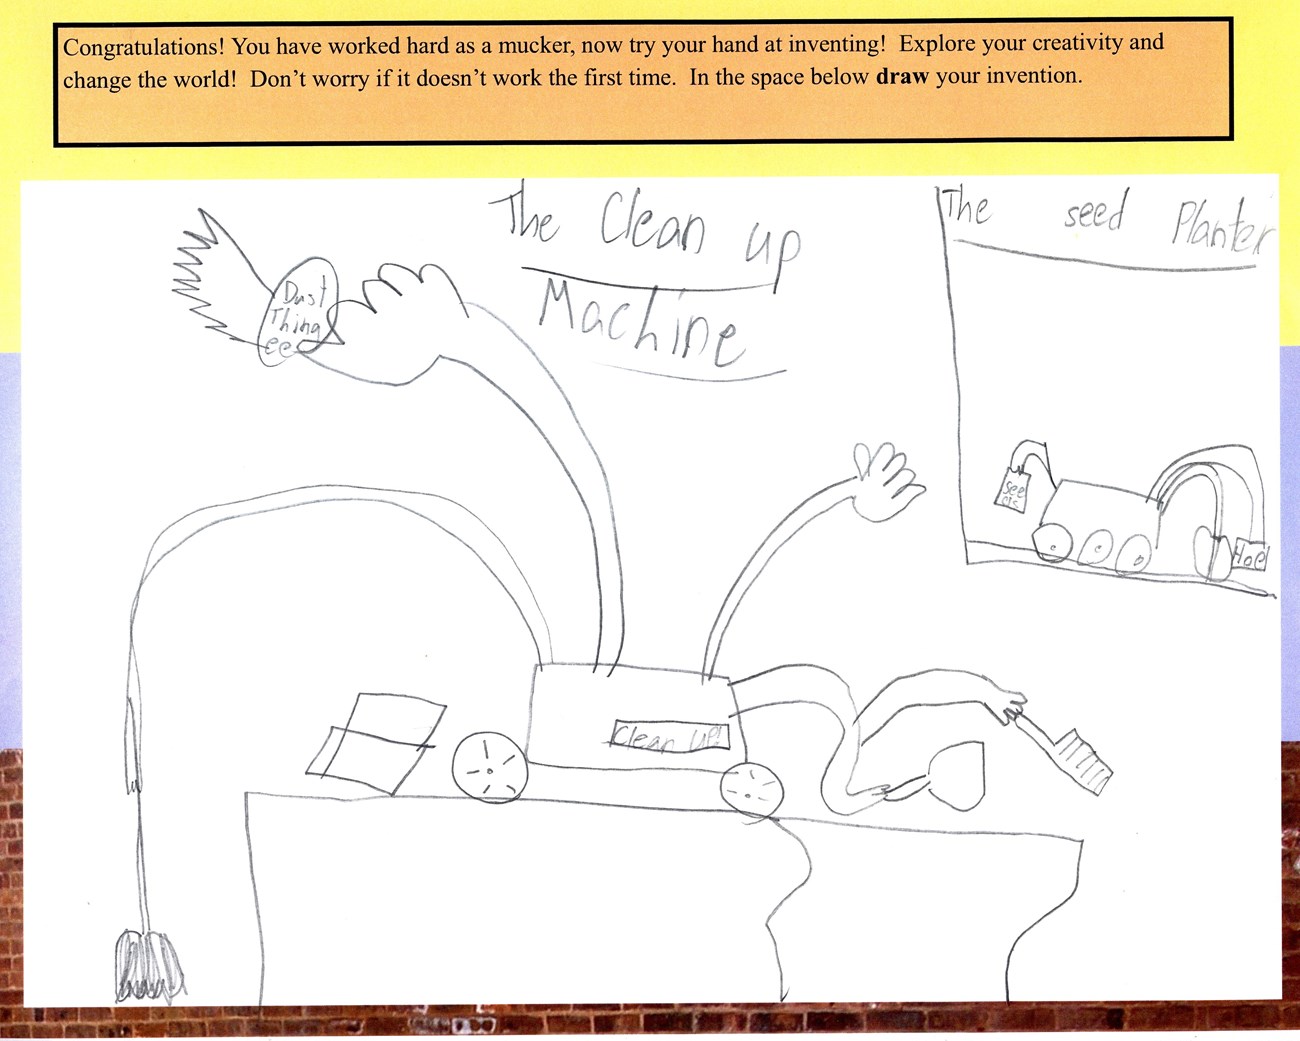 Drawing from the page of the Junior Ranger booklet.  On this page the Junior Ranger is asked to draw an idea for a new invention.  This Junior Ranger chose a  Clean-Up machine for their new invention.